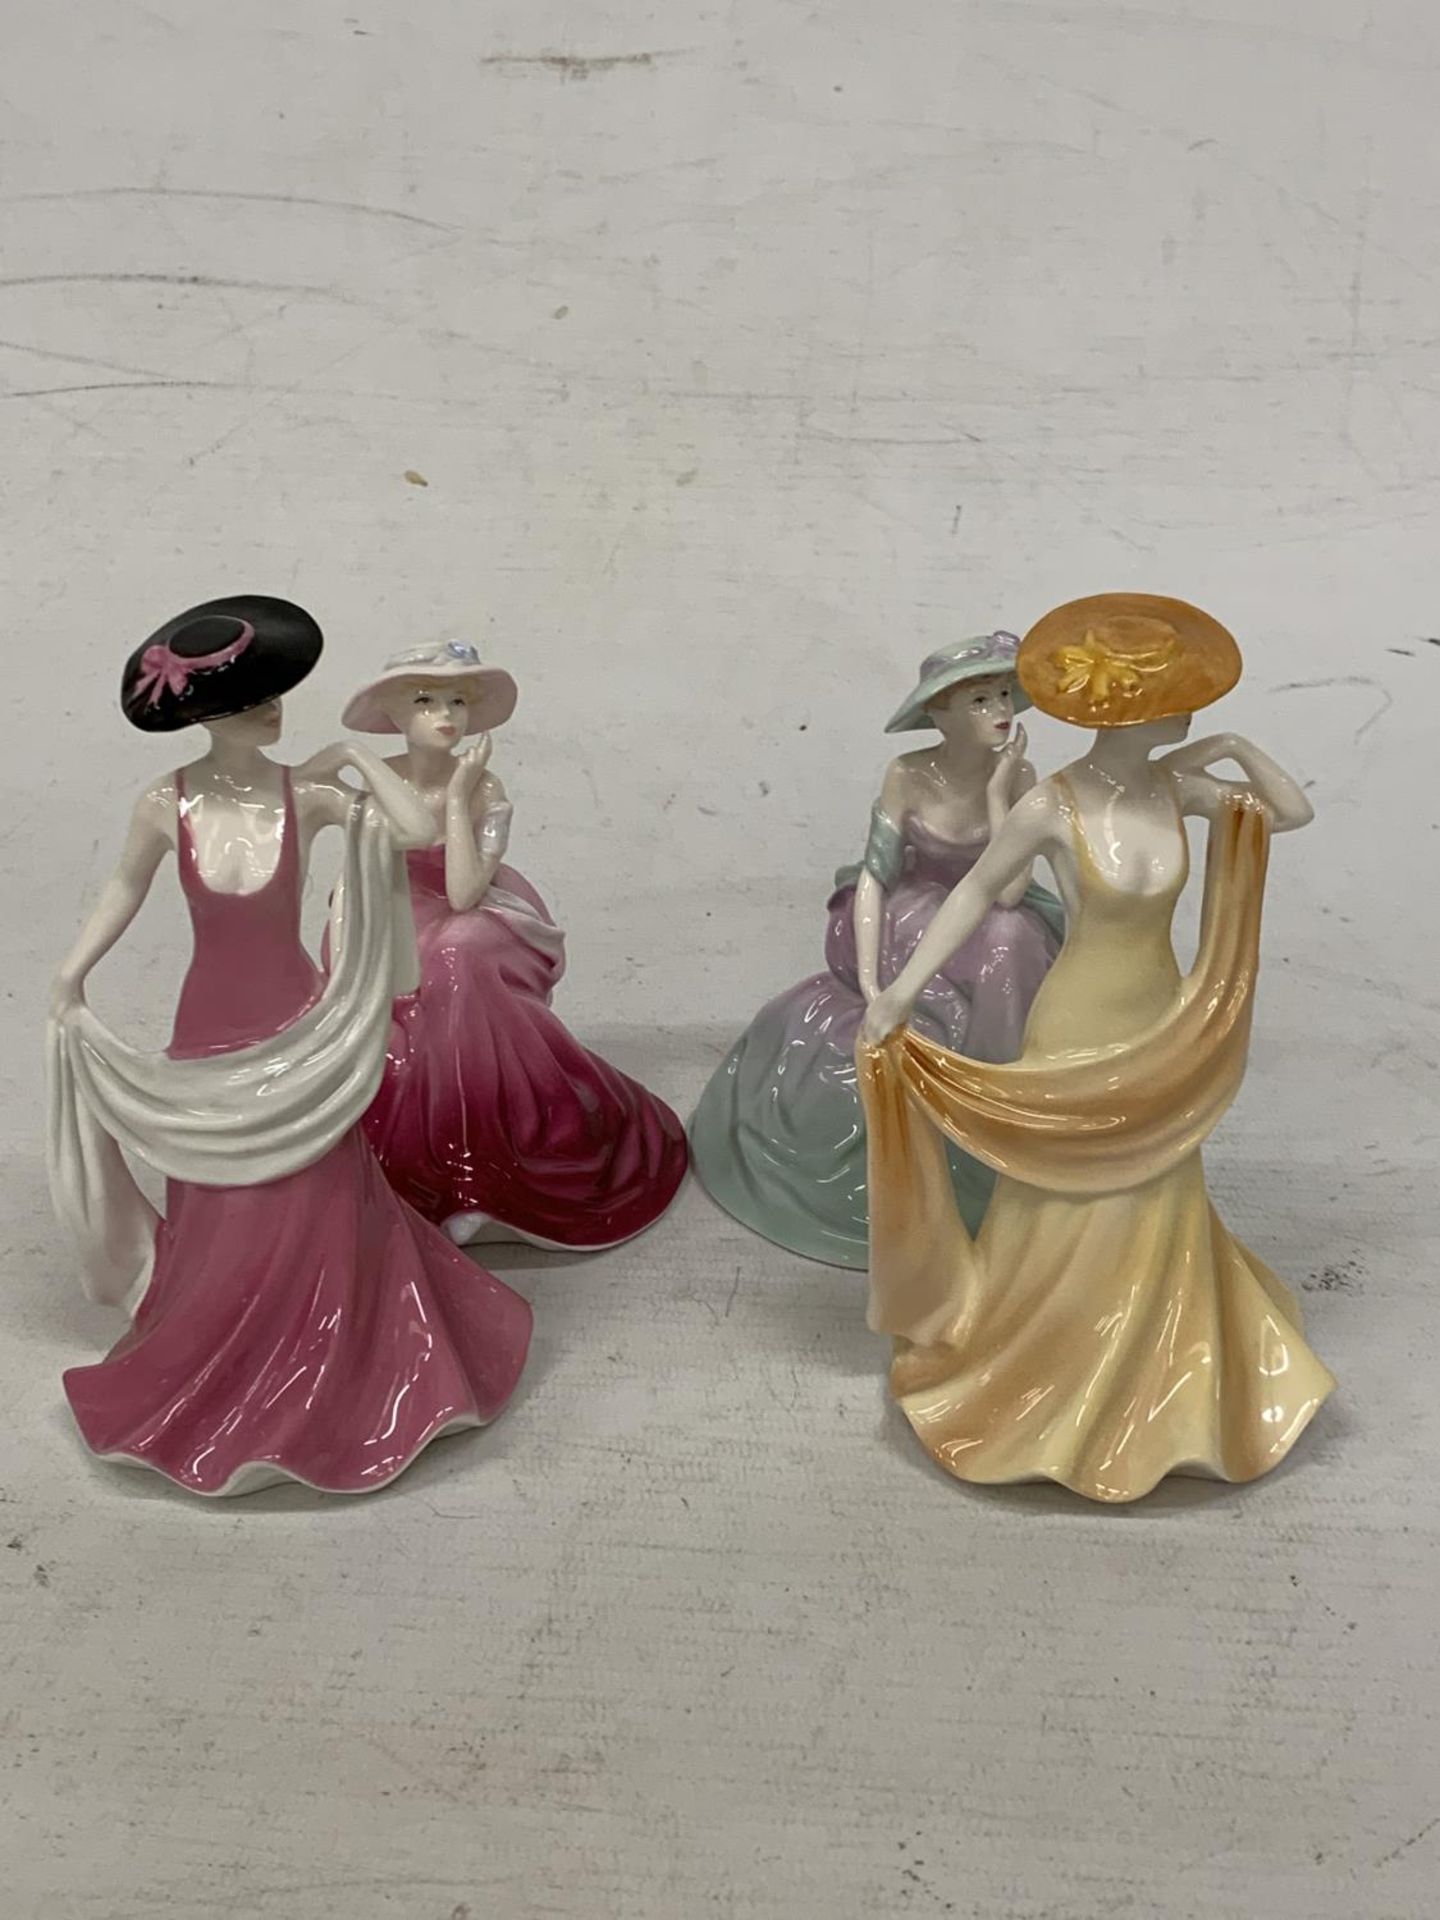 FOUR SMALL COALPORT FIGURINES "FASCINATION" "IN LOVE" "APRIL" AND "POPPY" - Image 2 of 4